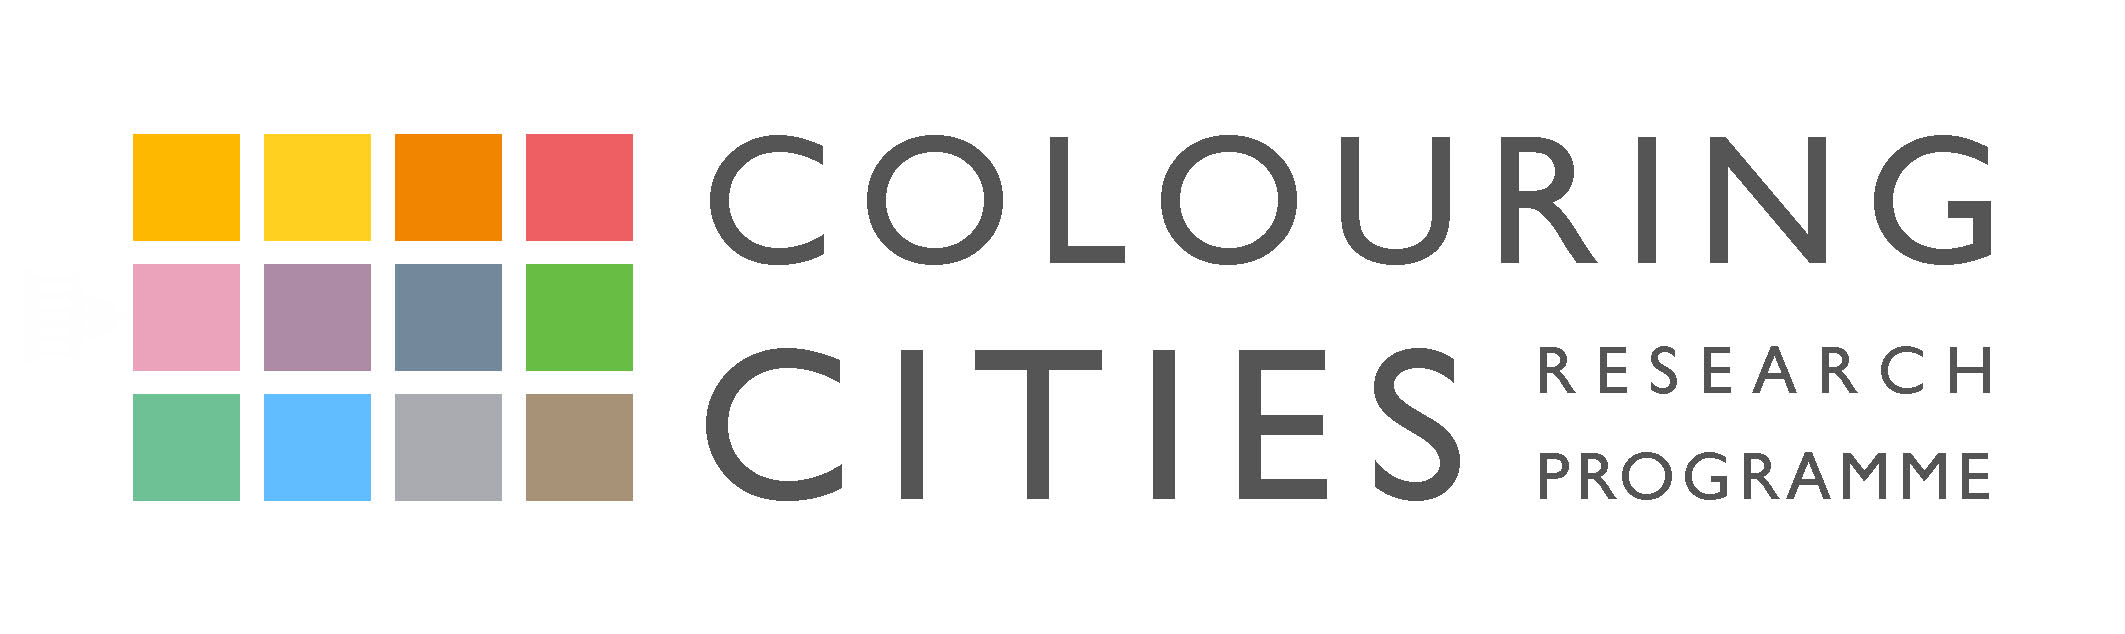 Colouring Cities Research Programme